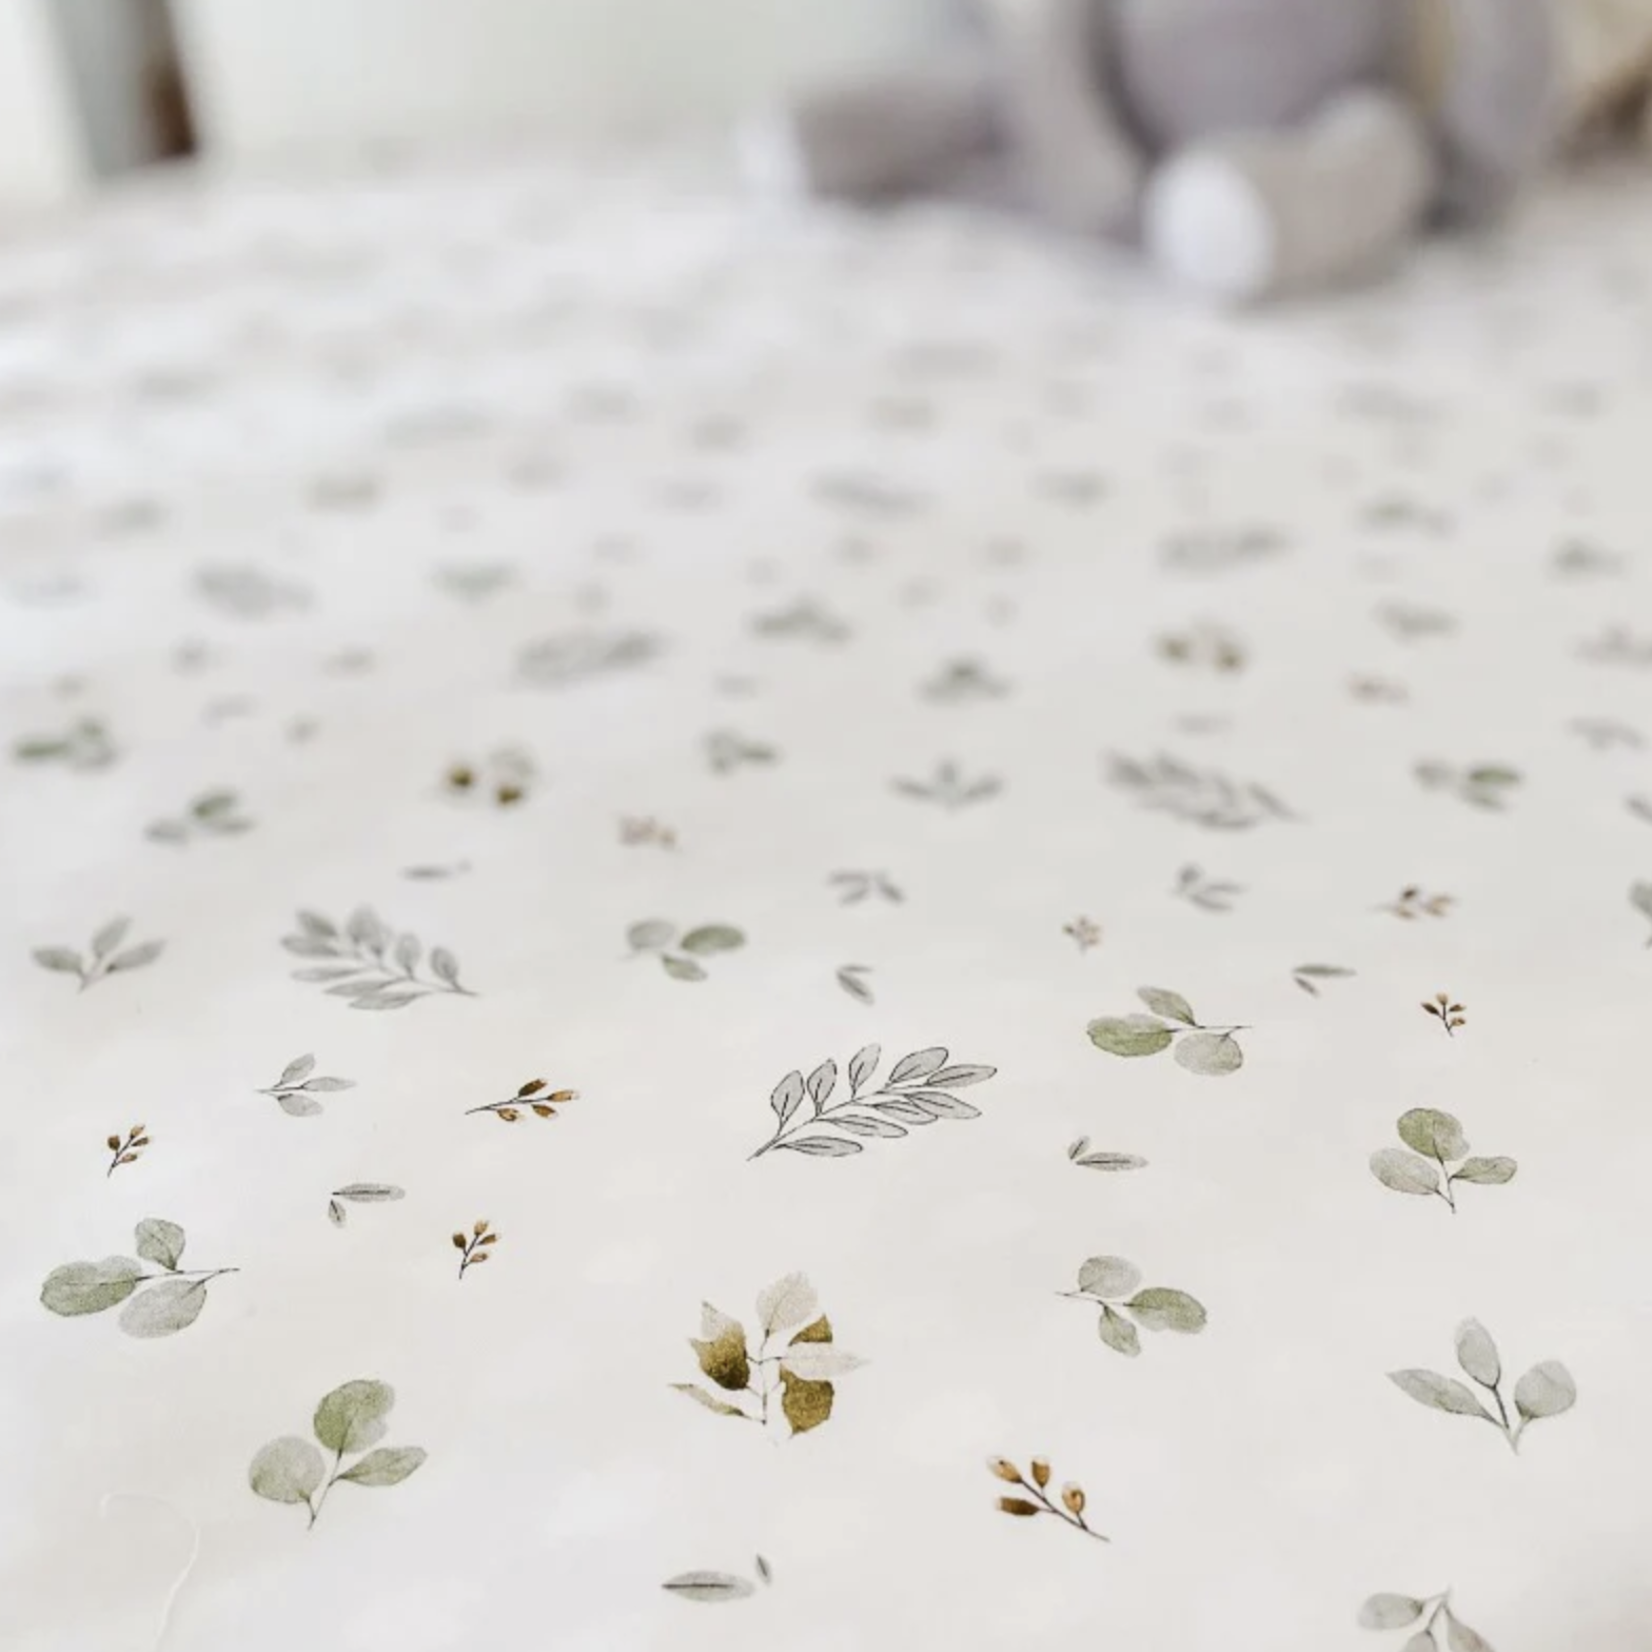 Snuggly Jacks Eucalypt Fall Fitted Cot Sheet